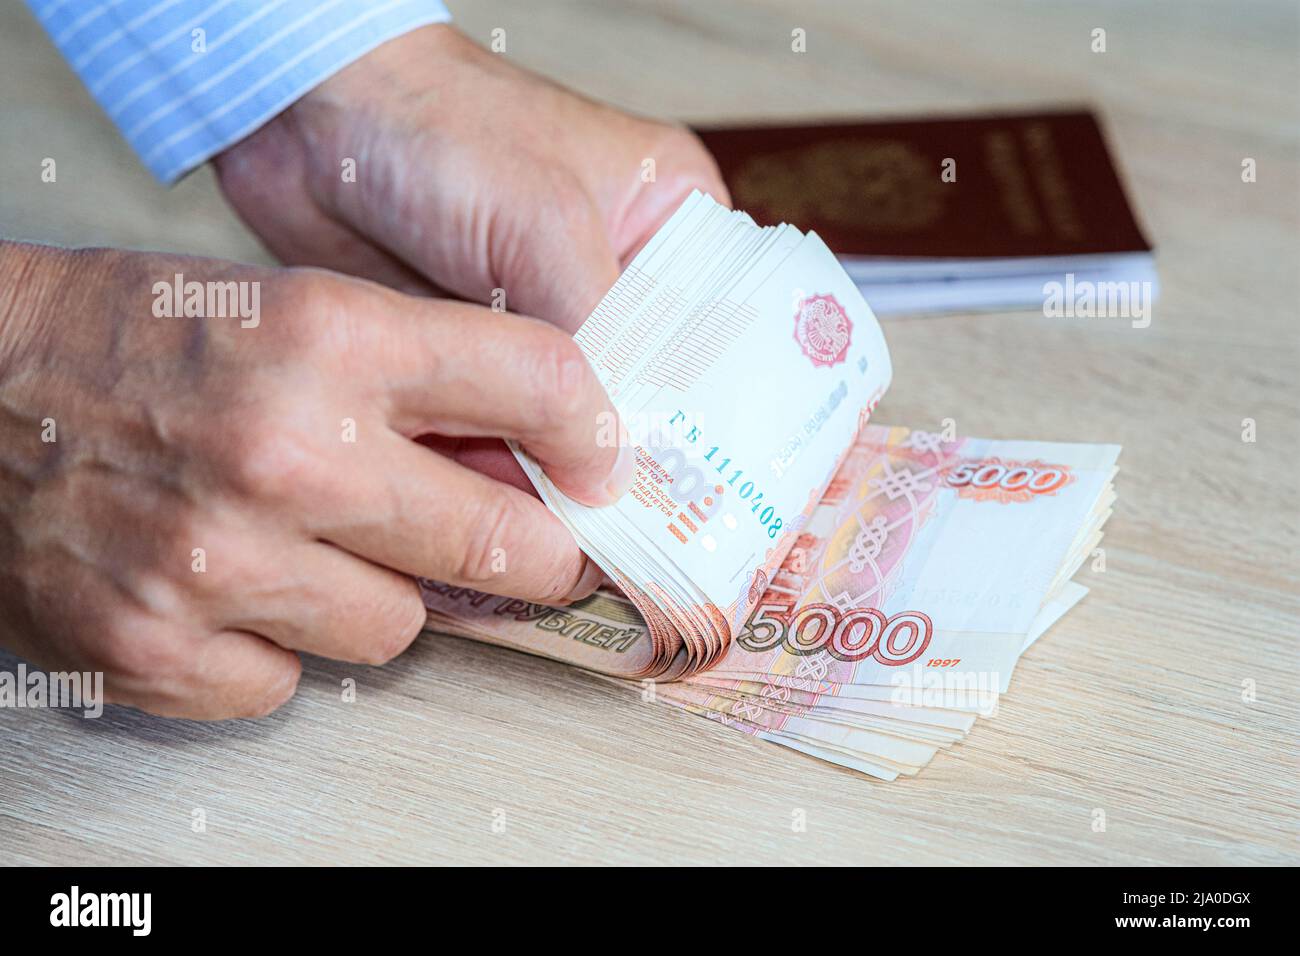 A woman's hand with money in the window cash register. The concept of currency exchange. The hand gives cash and the hands receive cash. The day of pa Stock Photo